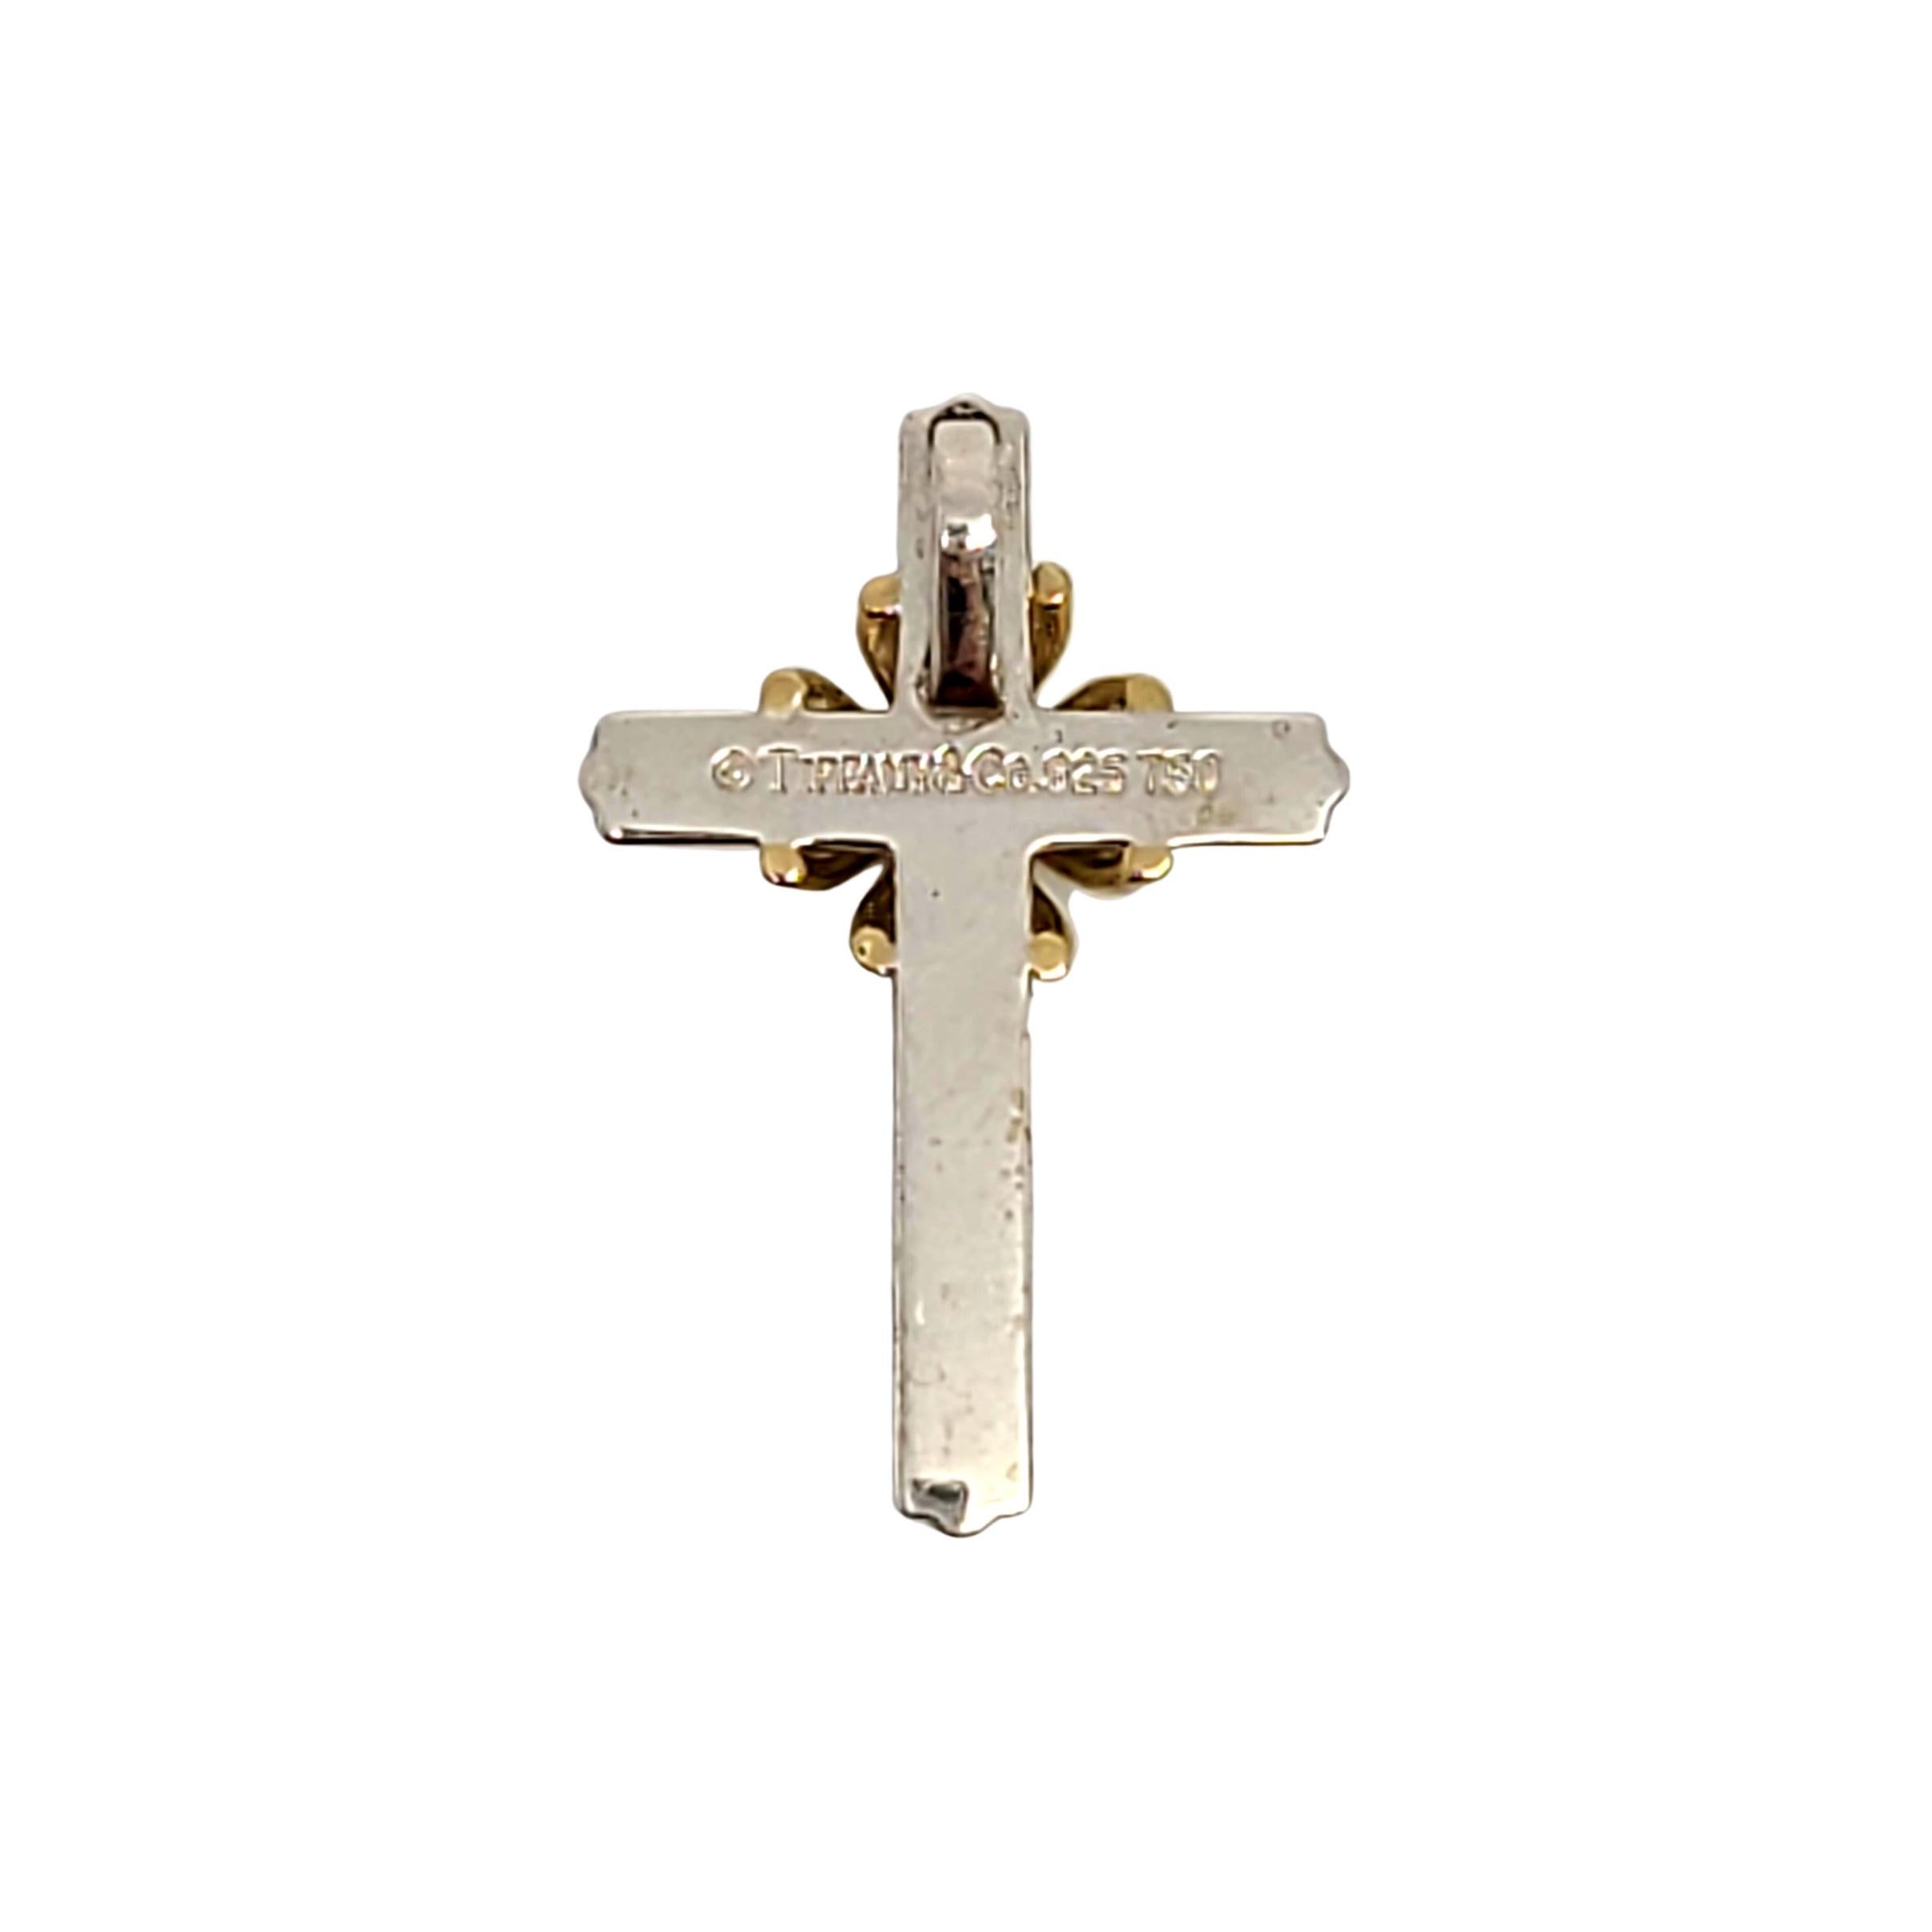 Tiffany & Co sterling silver and 18K yellow gold cross pendant.

Authentic Tiffany pendant in a classic and timeless design, featuring sterling silver cross with 18K yellow gold accent at its center. Tiffany box and pouch not included.

Measures